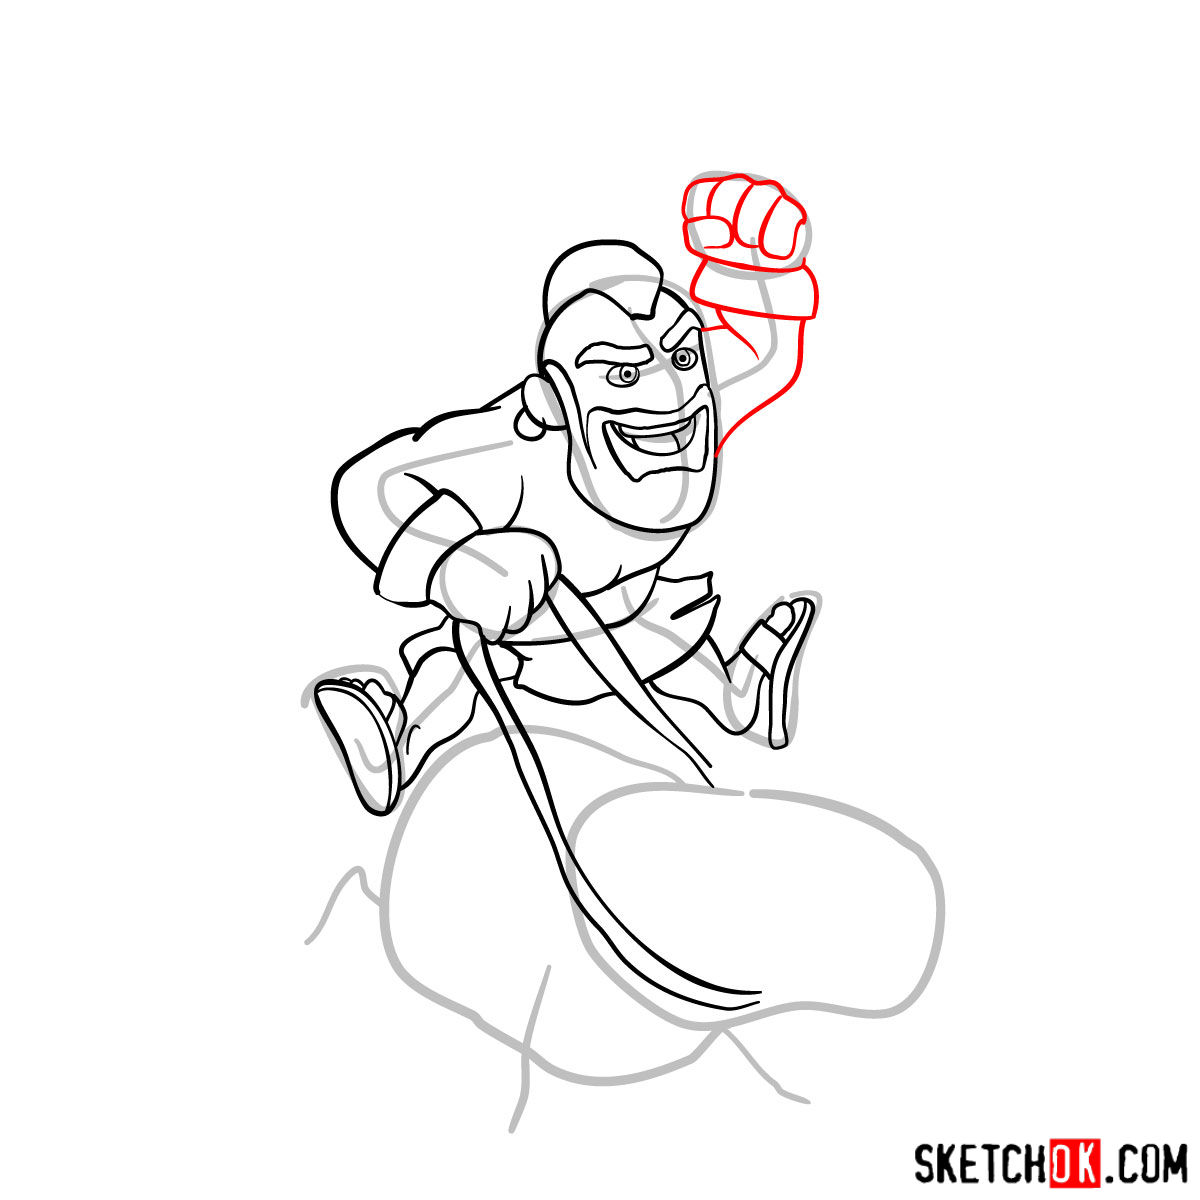 How to draw Hog Rider from Clash of Clans - step 08